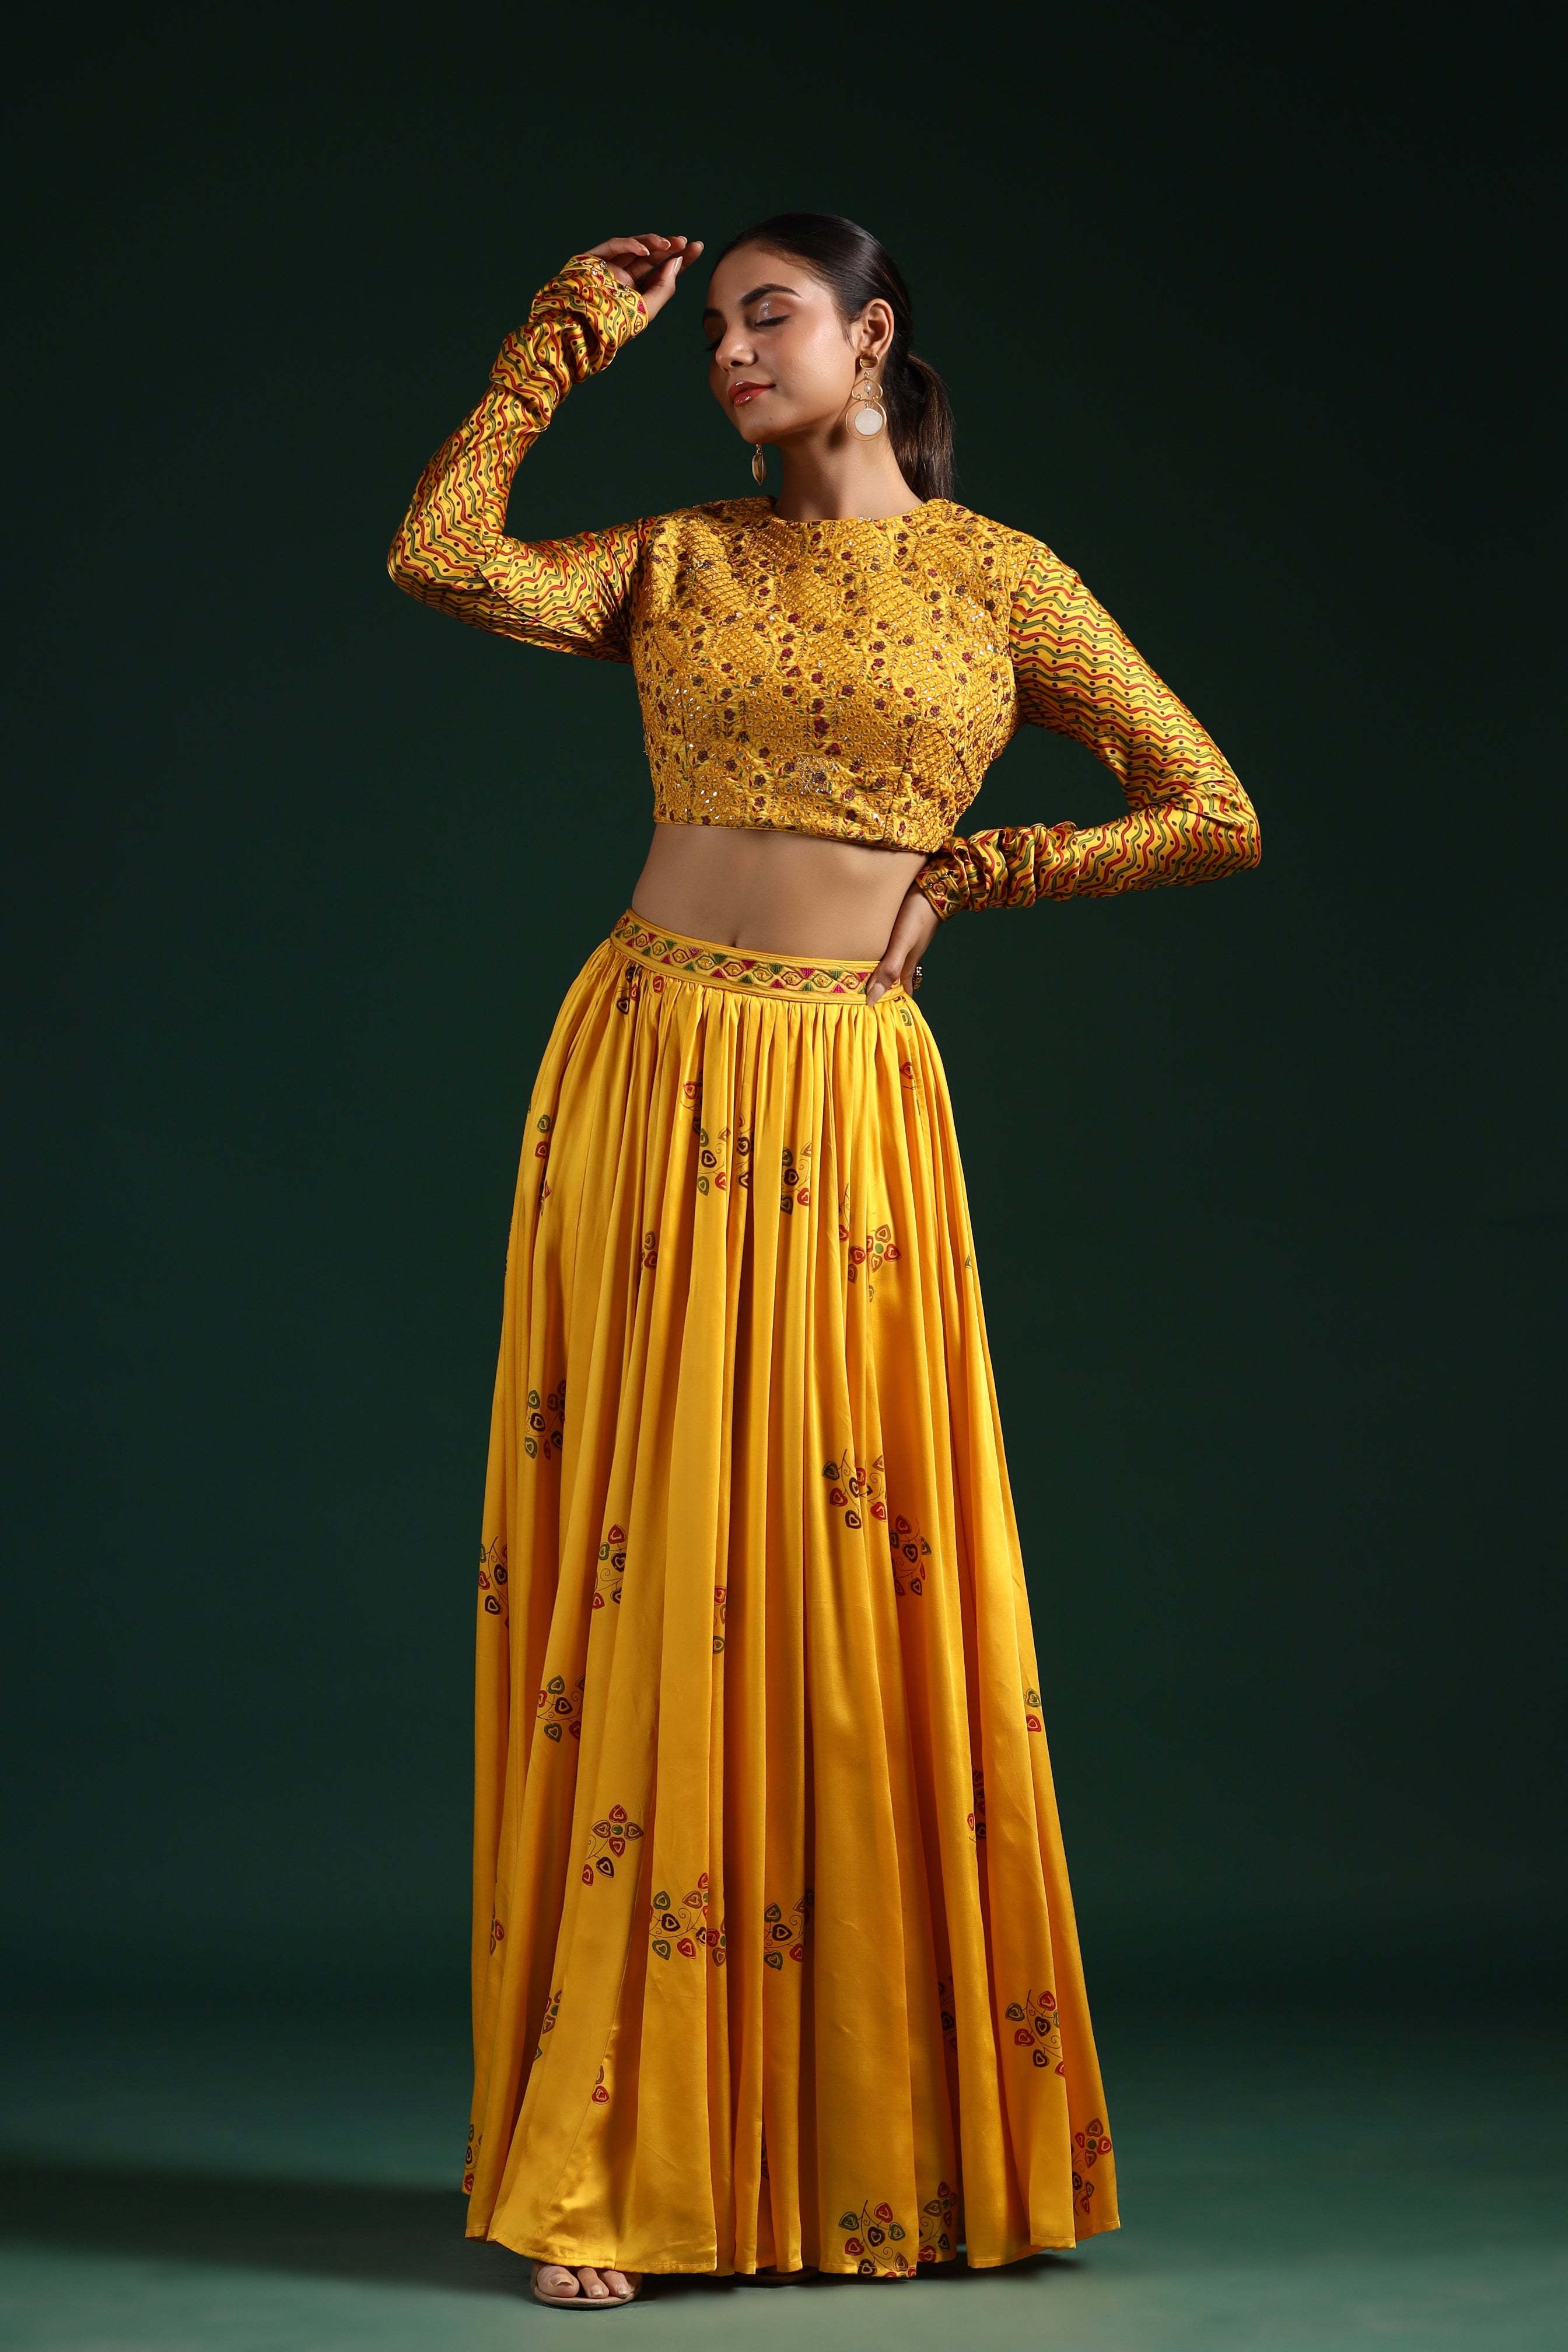 Tara Sutaria's Latest Bright Yellow Lehenga Can Be A Perfect Pick For Your  Next Wedding You Will Attend - HungryBoo | Indian designer outfits, Haldi  outfits, Lehenga designs